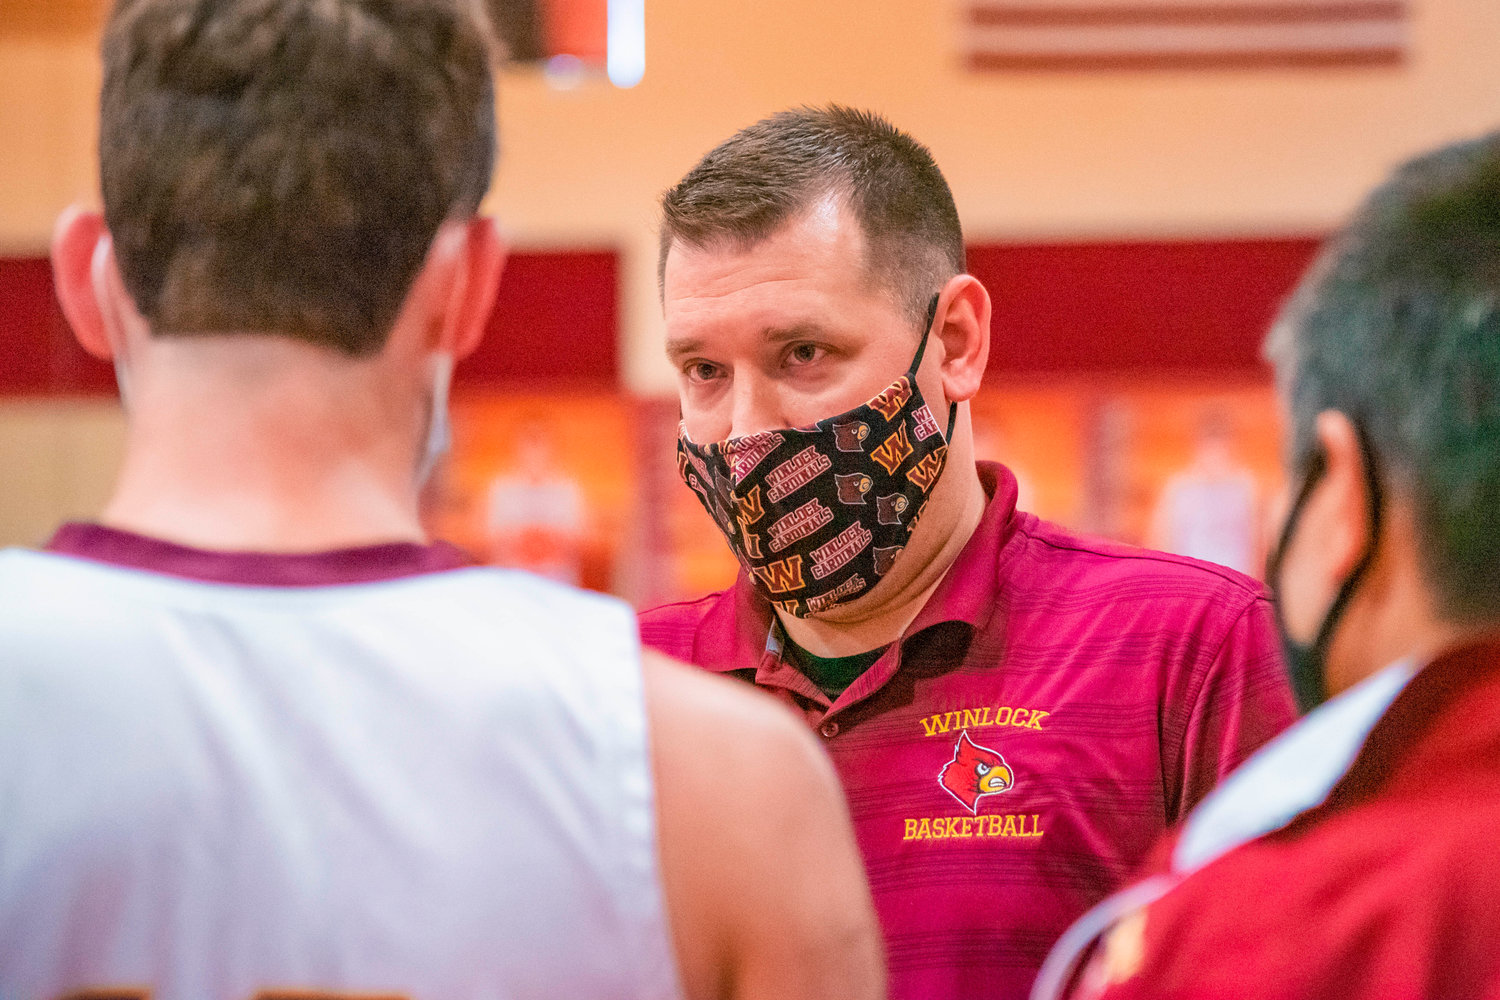 Winlock’s Head Coach Nick Bamer talks to players during a game against the Rockets on Thursday.